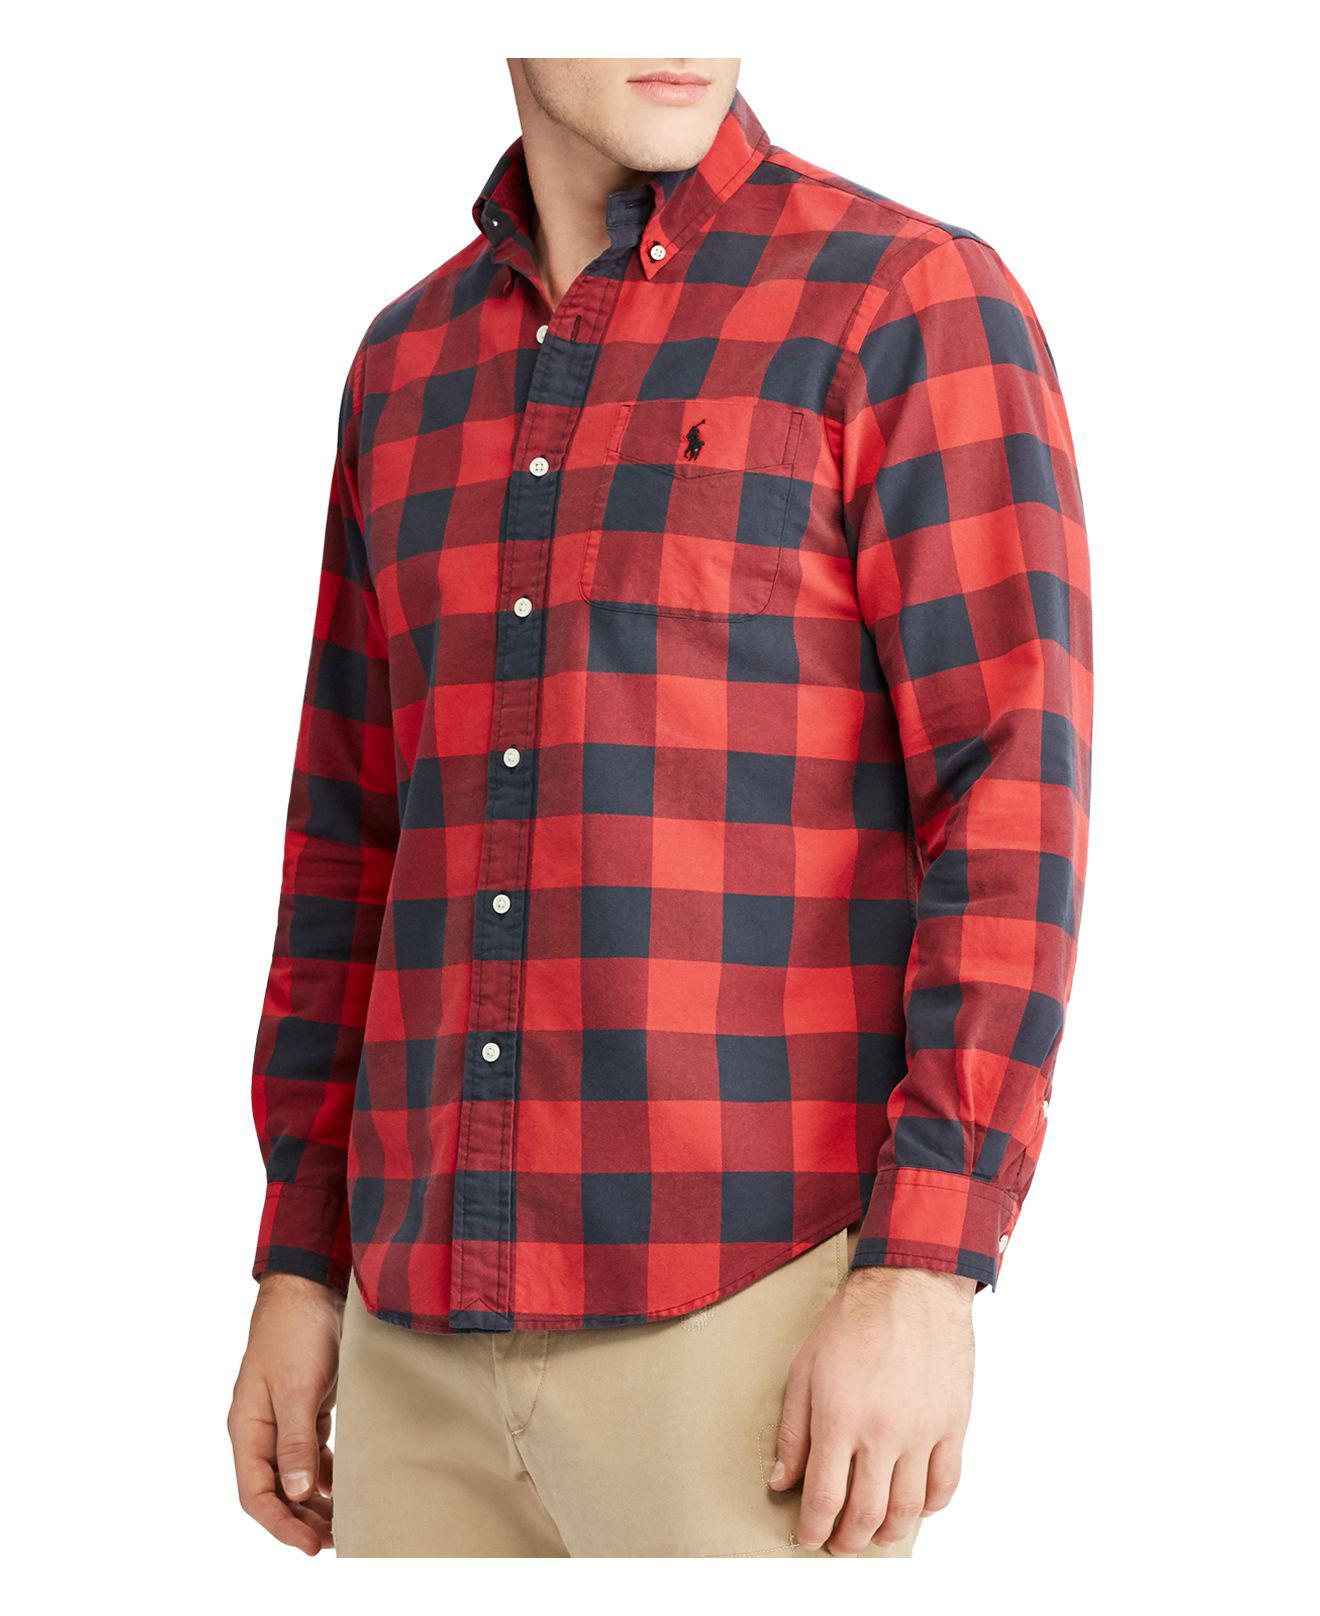 Vol Correspondentie Benodigdheden Polo Ralph Lauren Cotton The Iconic Plaid Oxford Shirt in Red / Black (Red)  for Men - Lyst